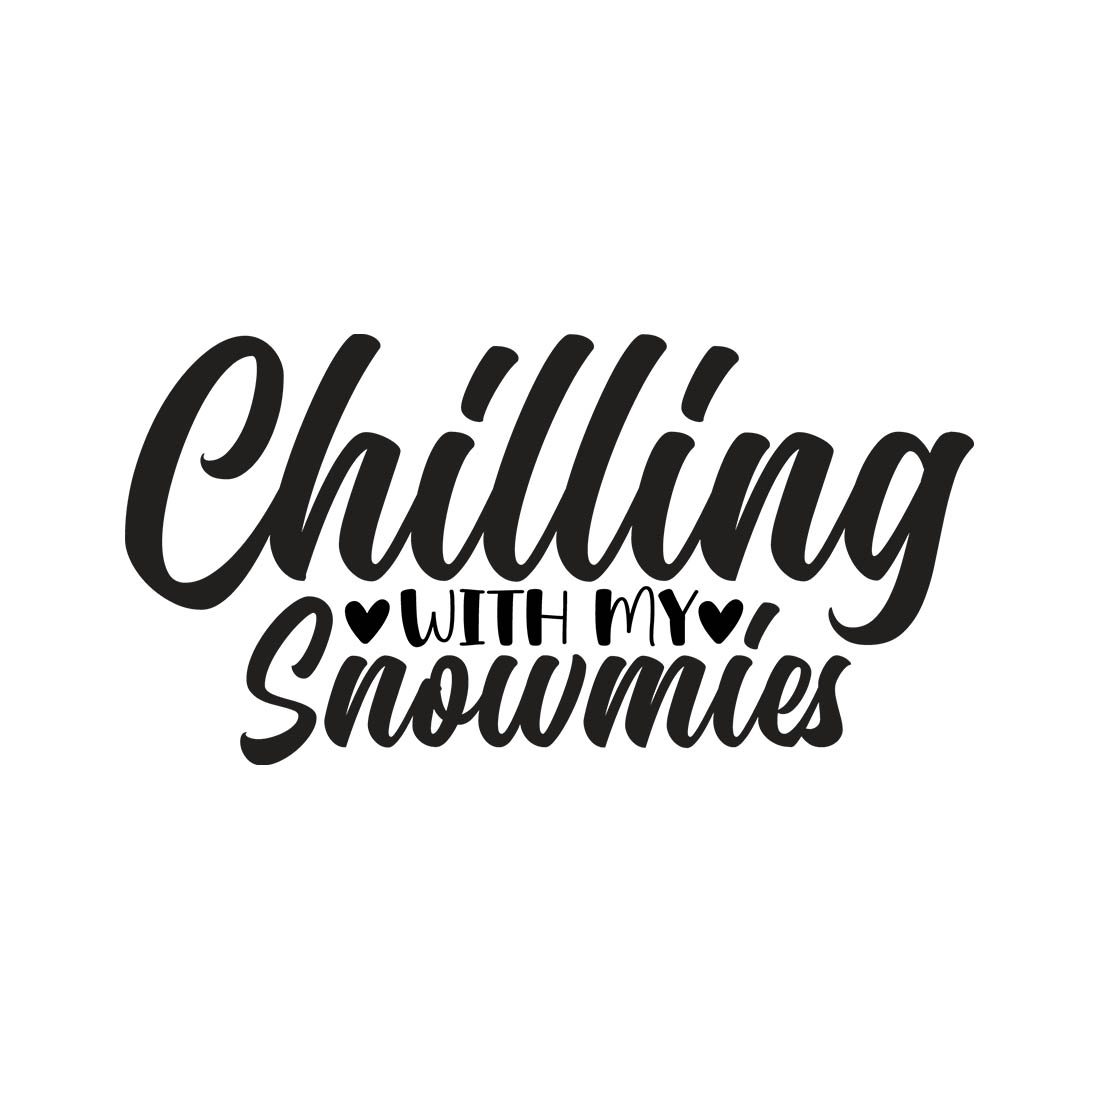 Image with elegant black lettering for prints Chilling With My Snowmies.